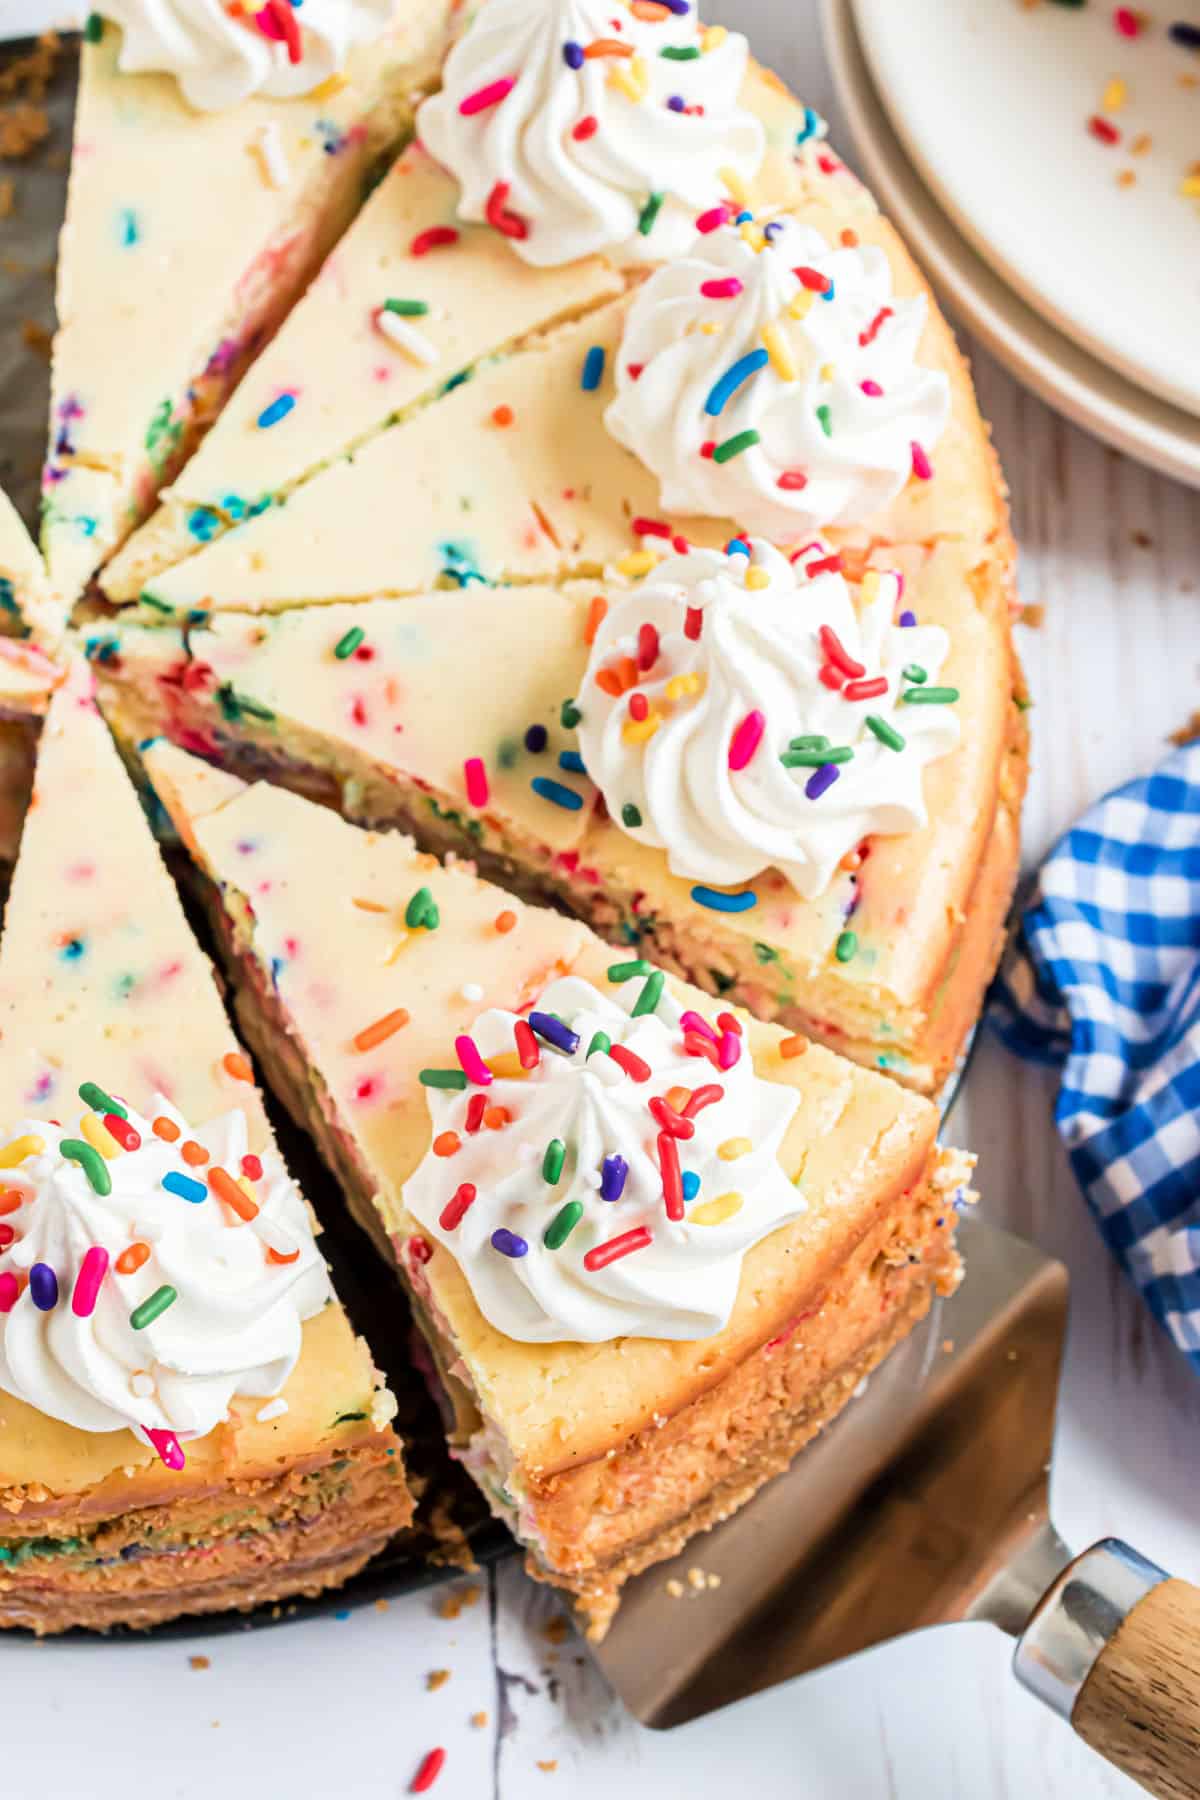 Funfetti cheesecake cut into slices and topped with whipped cream.